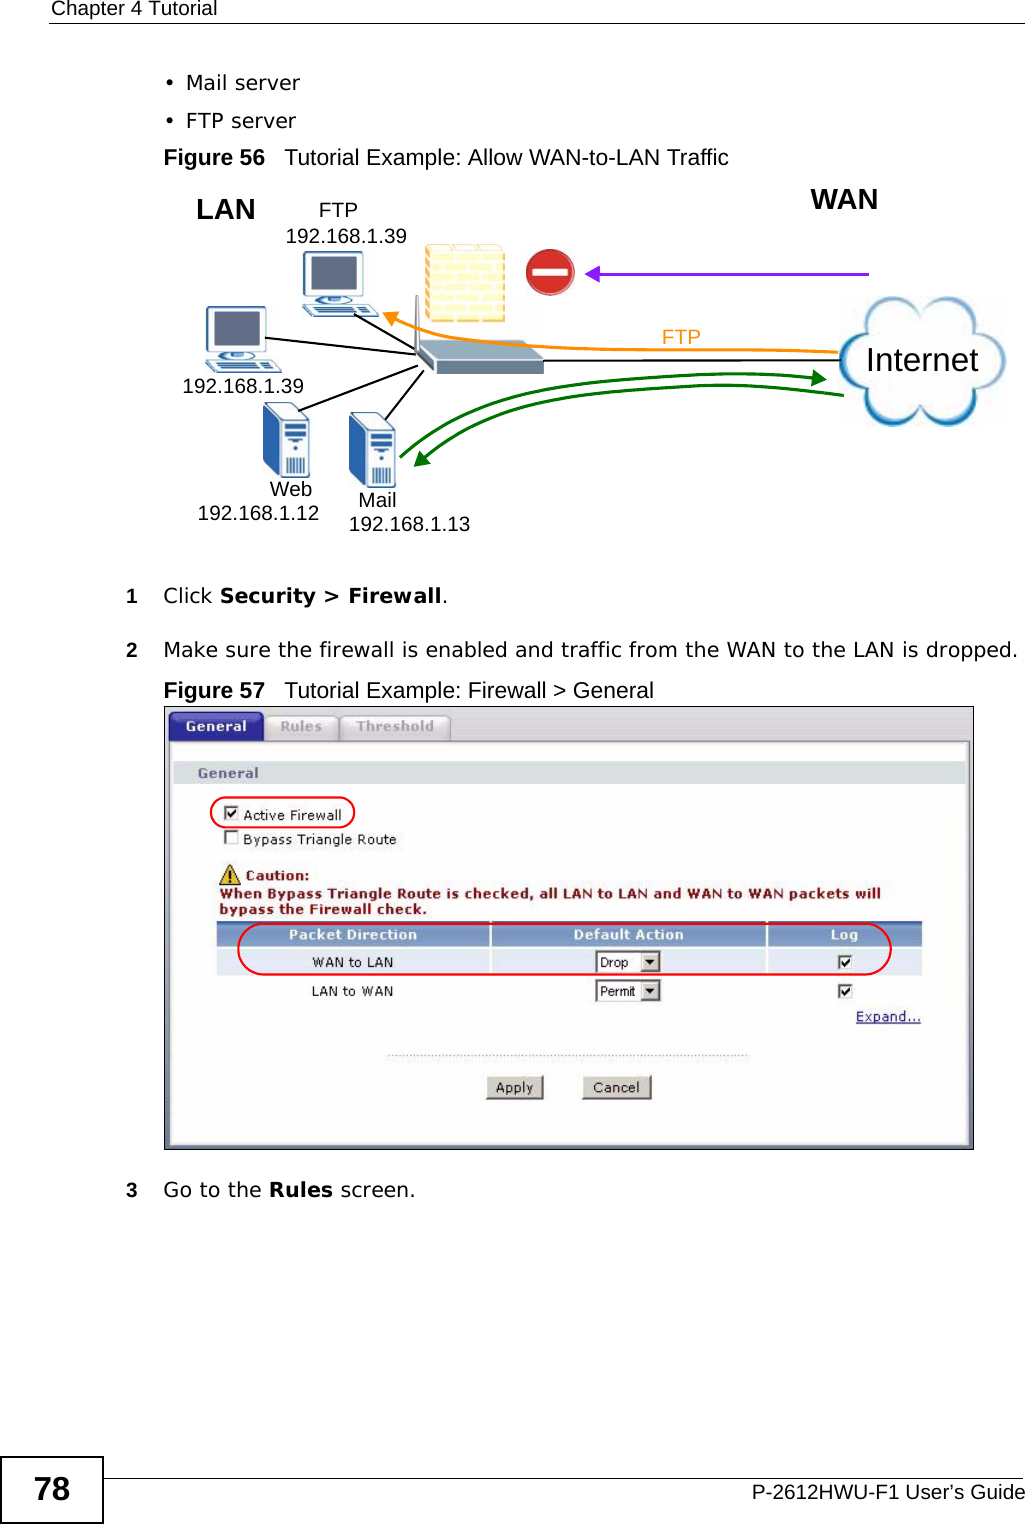 Chapter 4 TutorialP-2612HWU-F1 User’s Guide78• Mail server•FTP serverFigure 56   Tutorial Example: Allow WAN-to-LAN Traffic 1Click Security &gt; Firewall.2Make sure the firewall is enabled and traffic from the WAN to the LAN is dropped.Figure 57   Tutorial Example: Firewall &gt; General 3Go to the Rules screen.InternetFTPFTP 192.168.1.39192.168.1.39192.168.1.12 192.168.1.13MailWebWANLAN